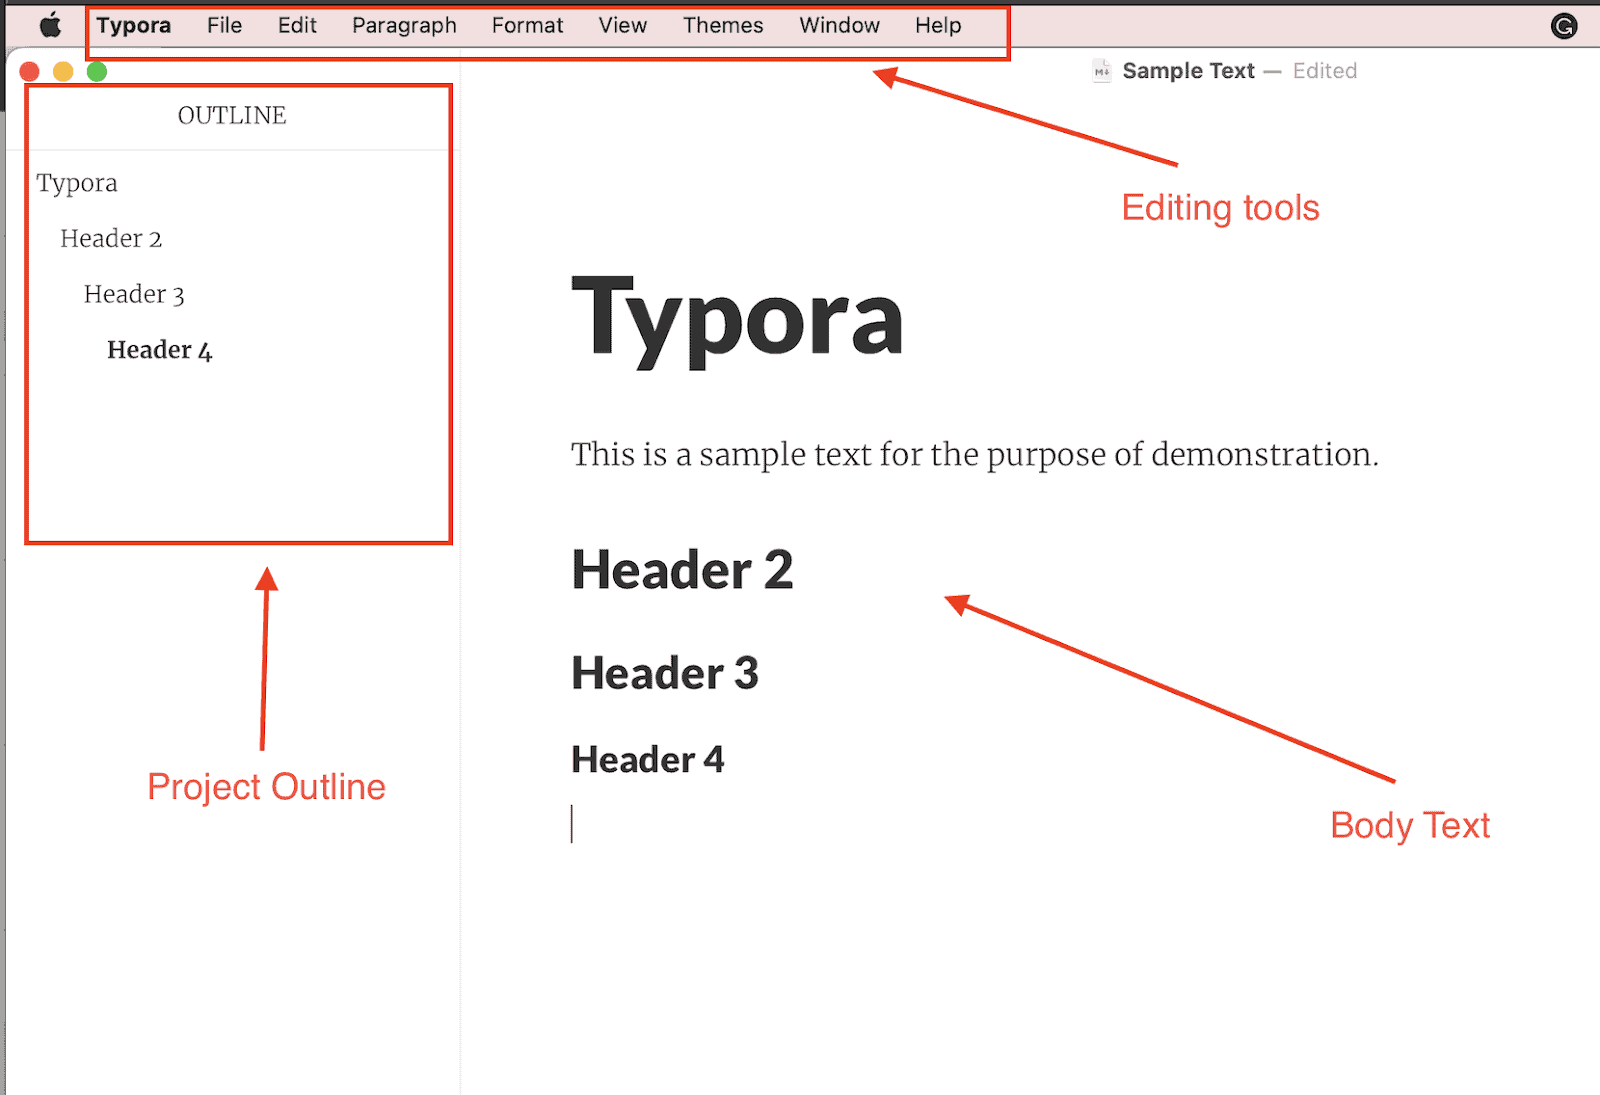 Highlighting of key features of Typora software like "Project outline", "Body text" and "Editing tools"